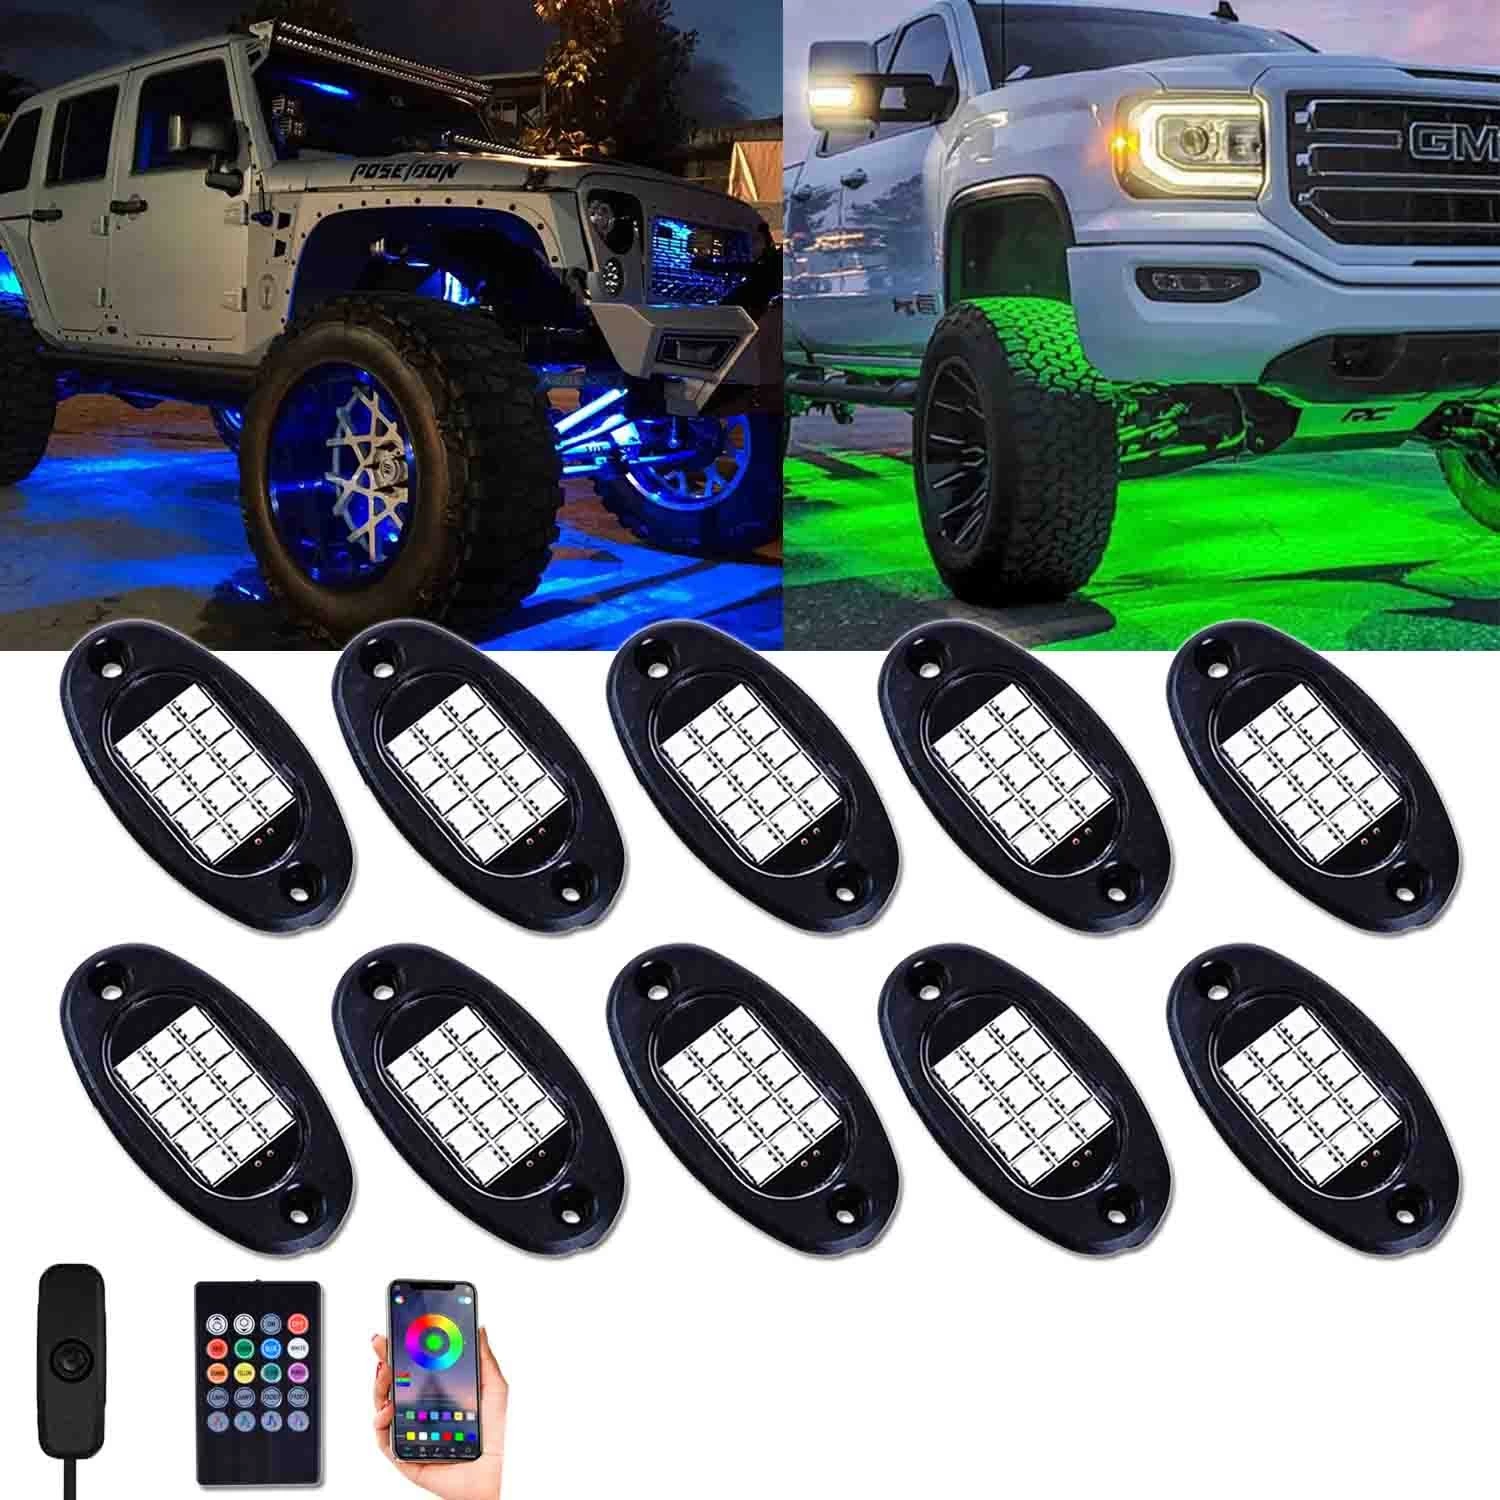 Unionlux RGB LED Rock Lights 60 LEDs Multicolor Underglow Neon Lights Waterproof Aluminum Light Kit with RF/APP Control Music Mode Timing Function for Truck Jeep Off Road Car UTV ATV SUV 10 Packs